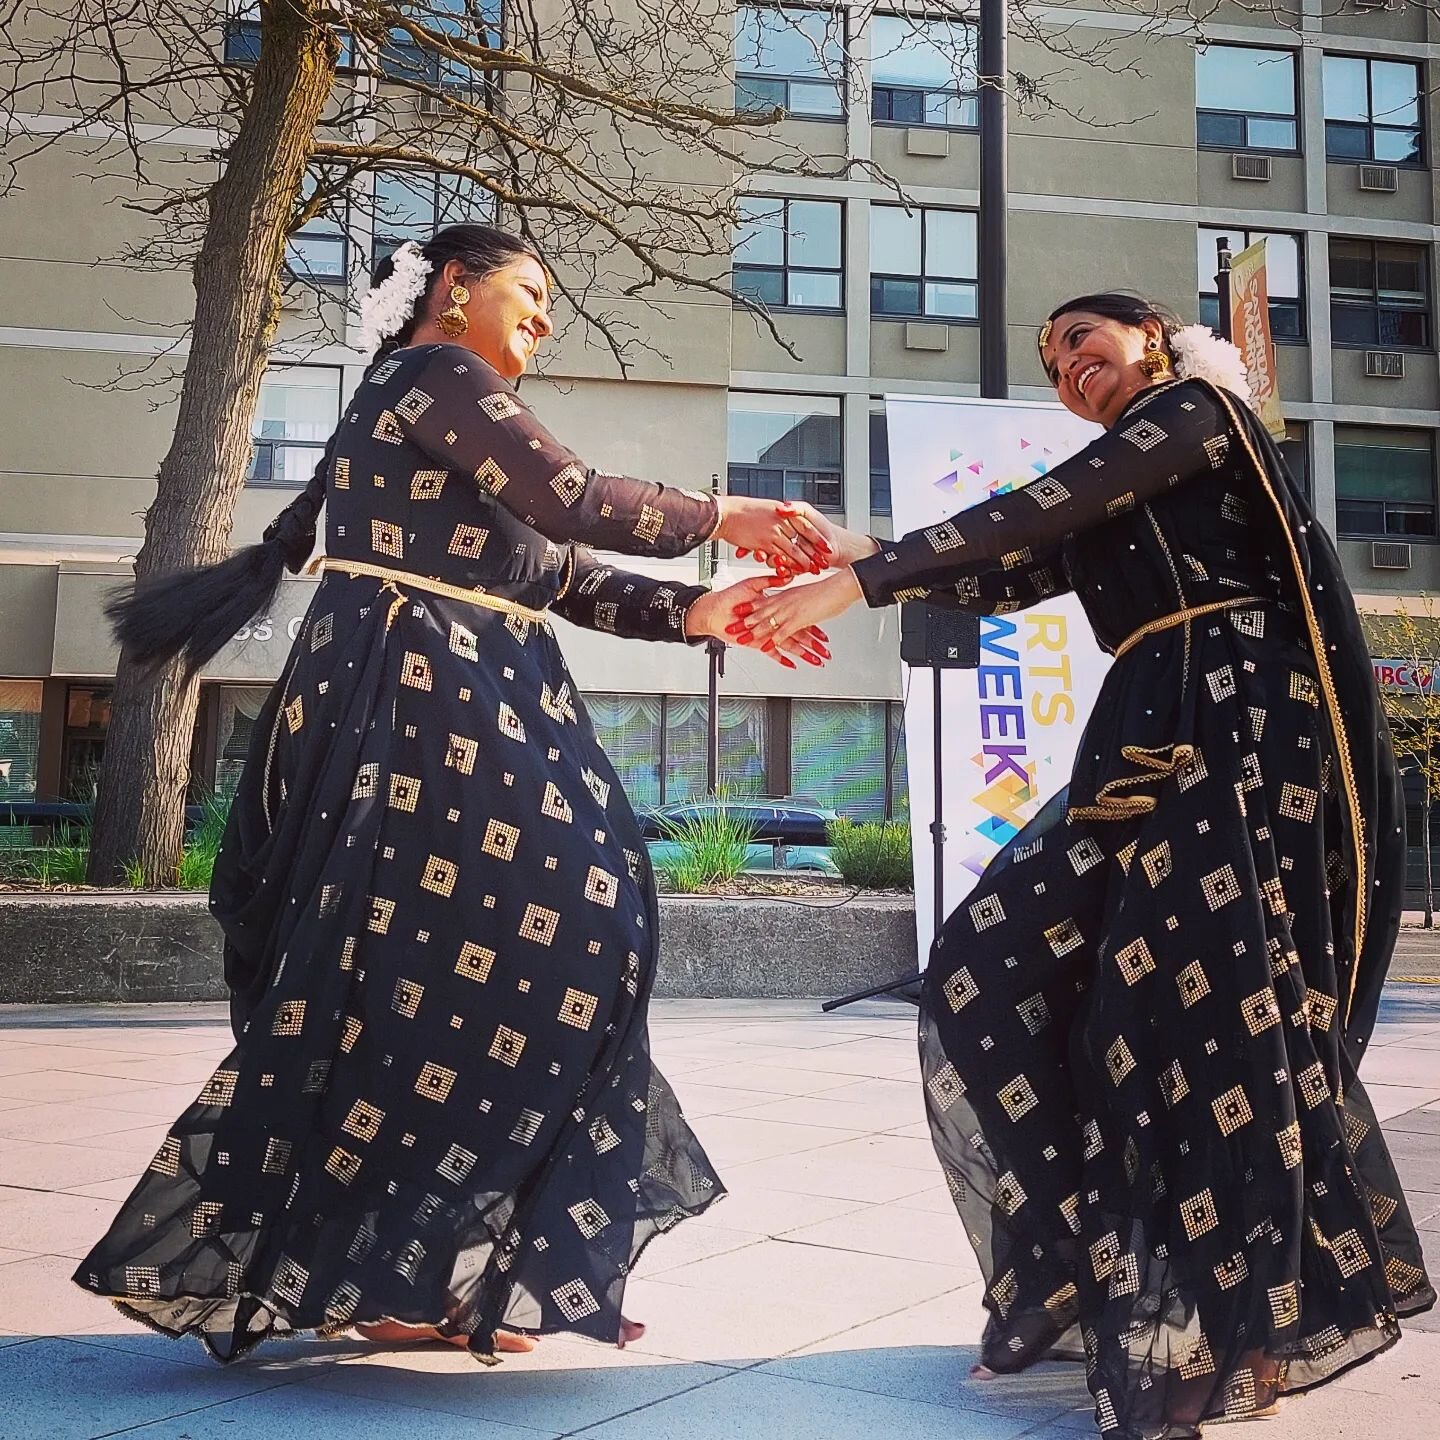 Mintu Maria James is not only performing this Friday, she will also be teaching us some Bollywood moves 🫶 

Mintu brings amazing energy as she mixes Indian Classical &amp; Bollywood dance together. We are so excited to see her perform and learn a da